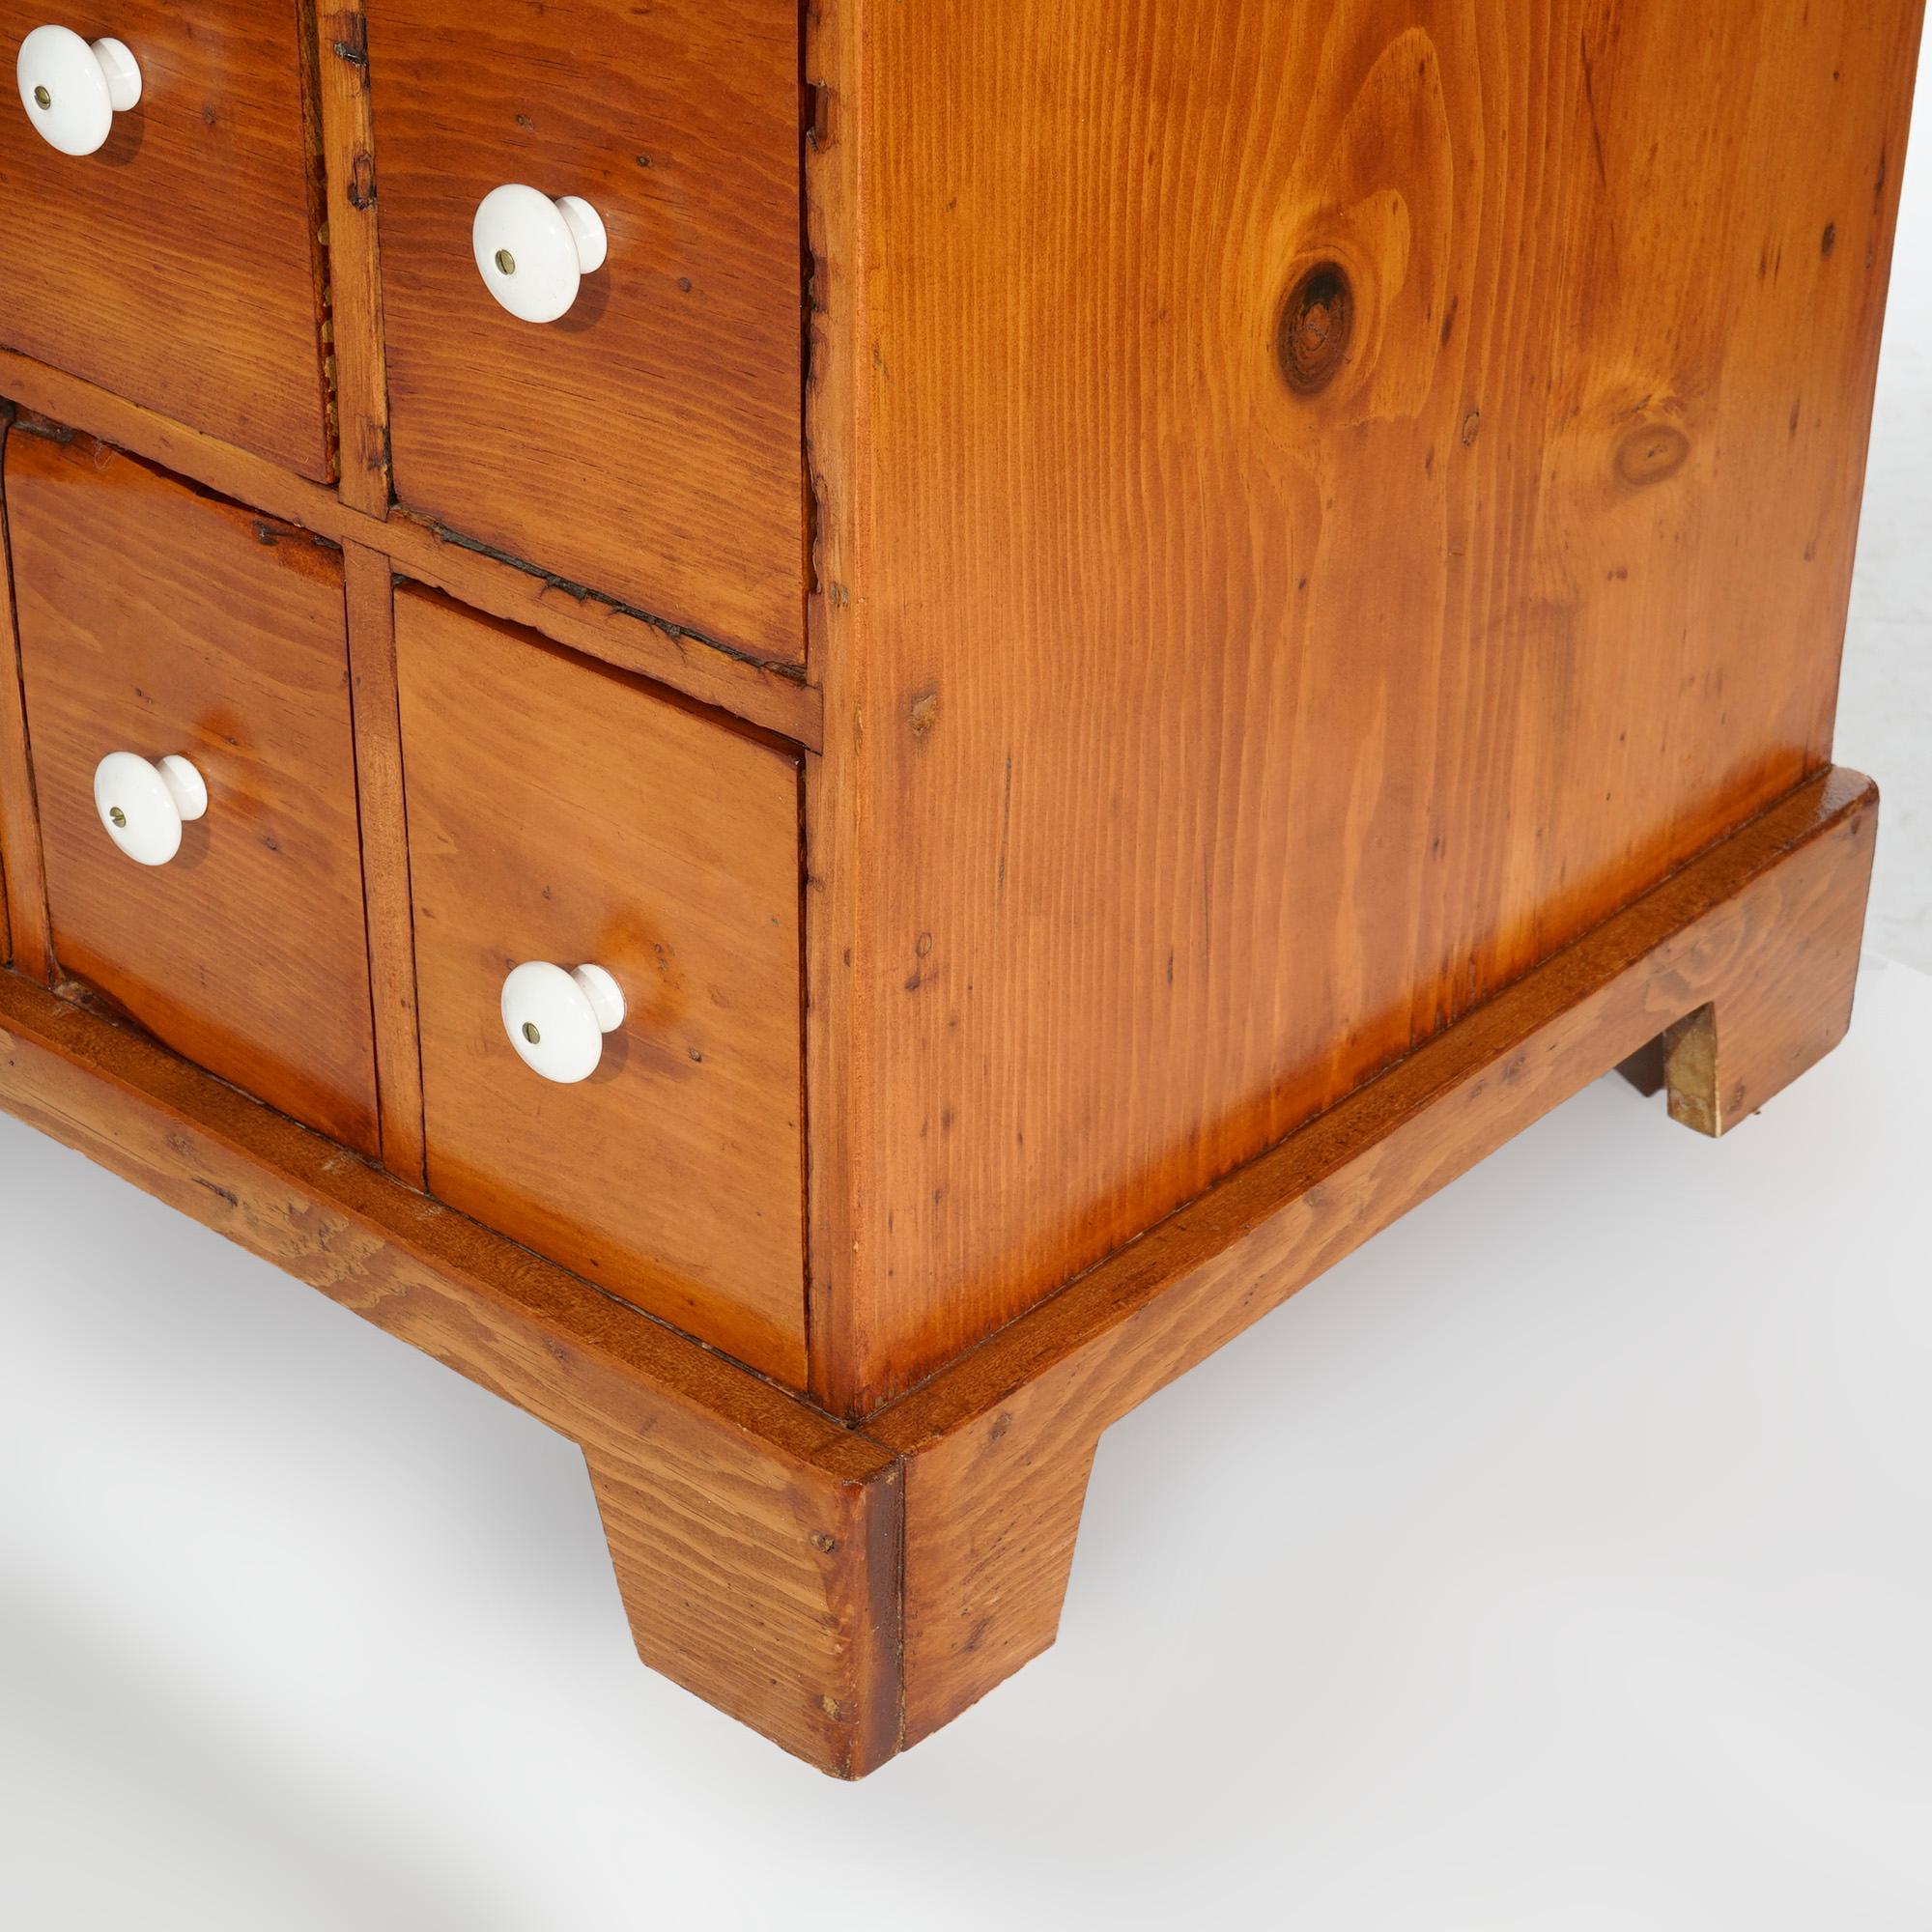 Antique Pine Twelve-Drawer Apothecary Cabinet with Porcelain Knobs, 19th C For Sale 12